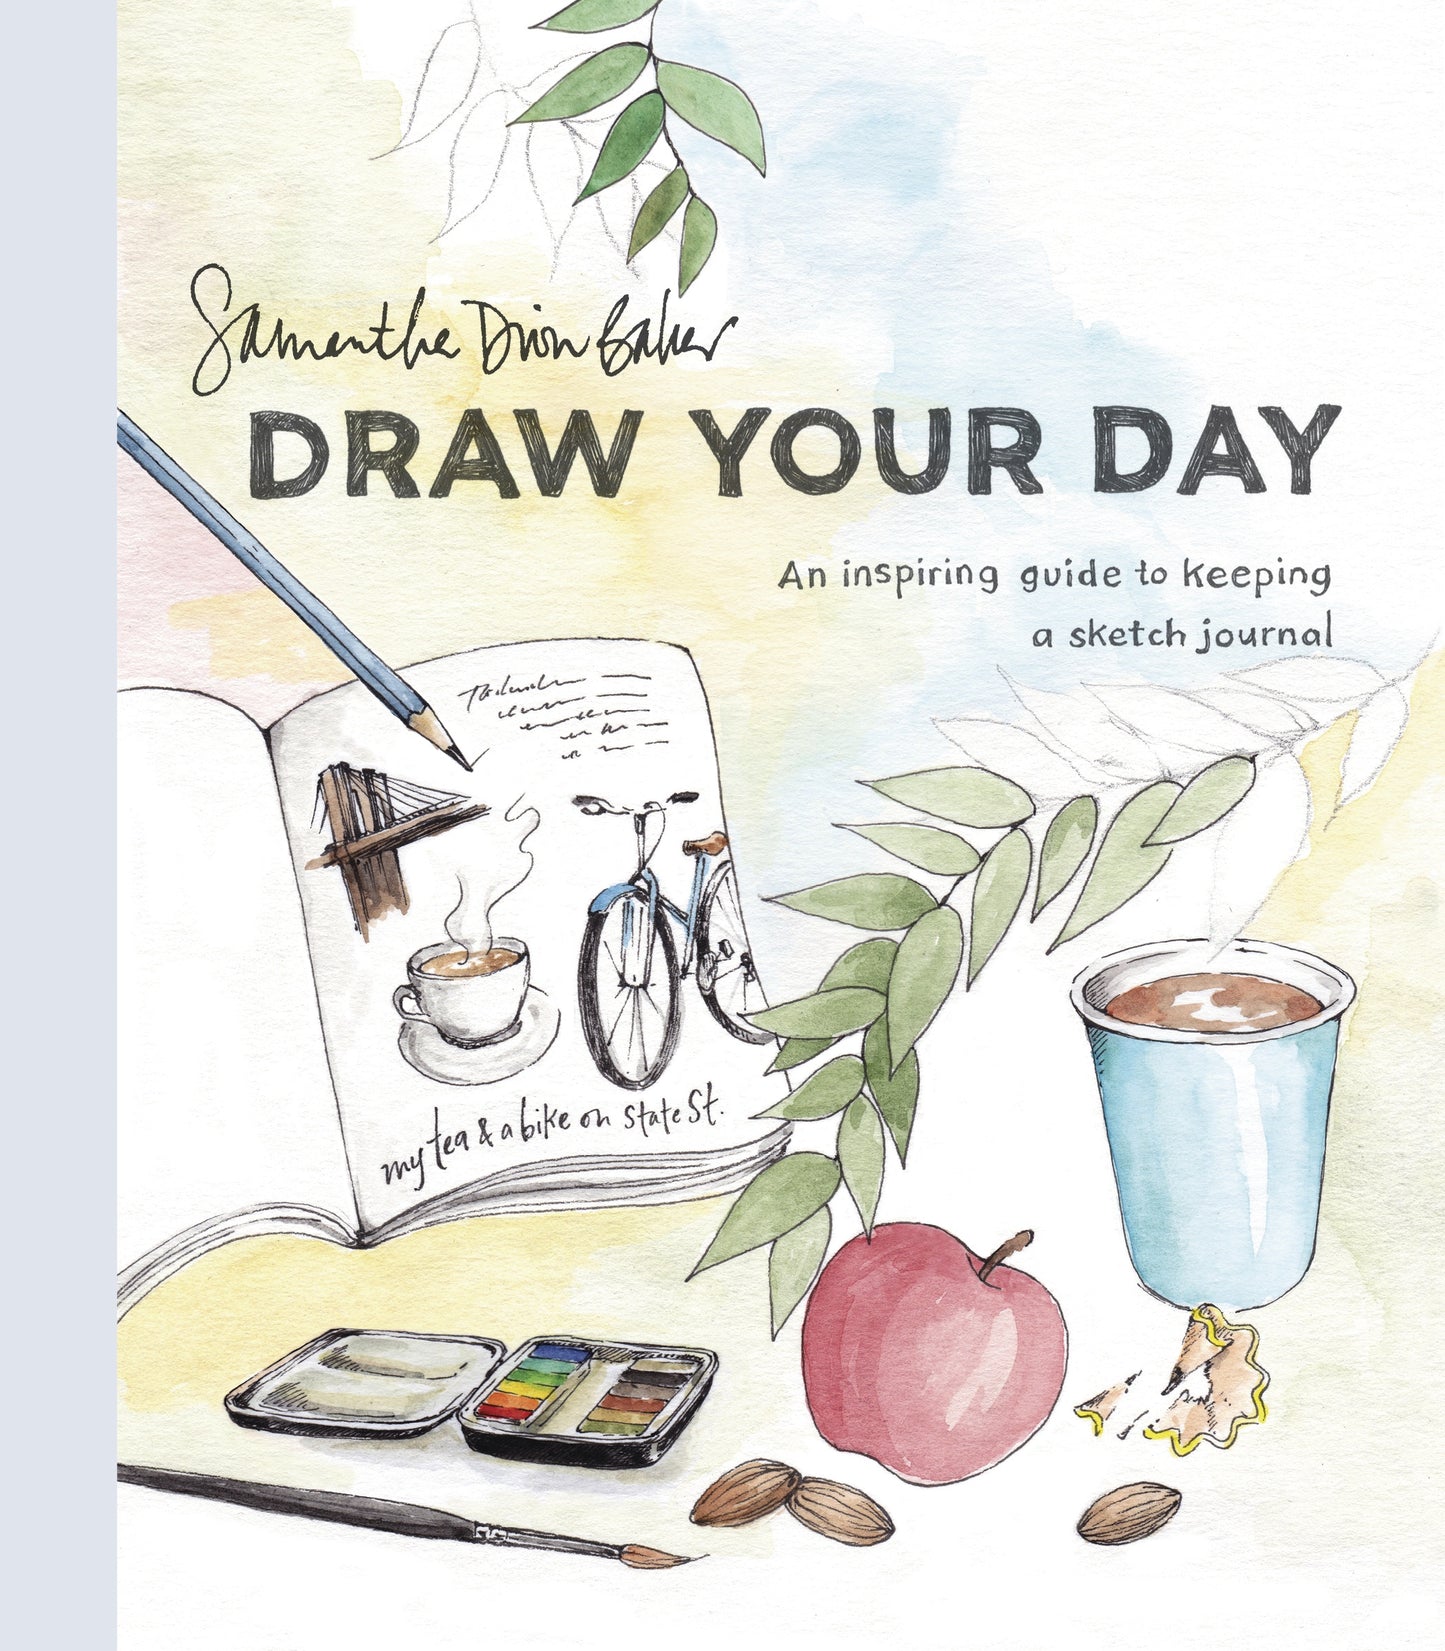 Draw Your Day | An Inspiring Guide to Keeping a Sketch Journal